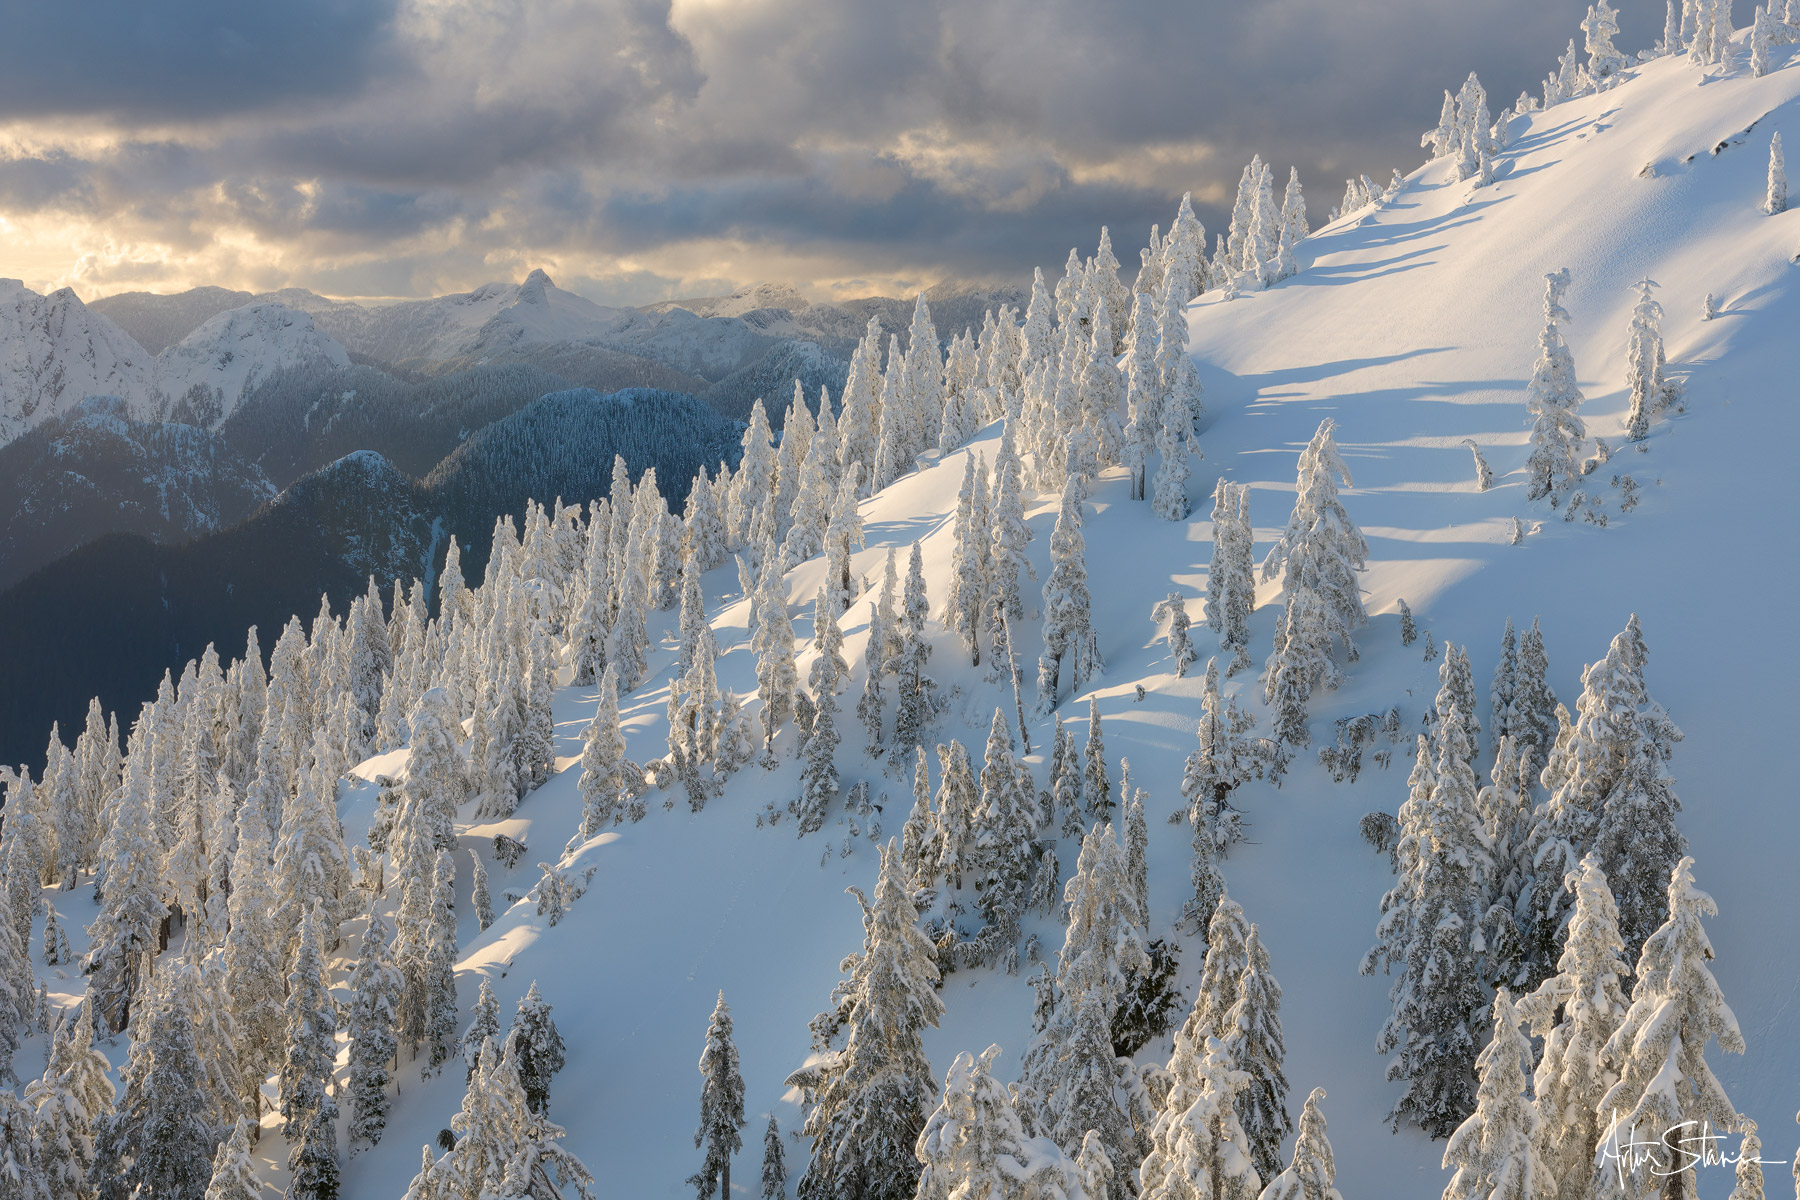 Winter scenery in the mountains of British Columbia.